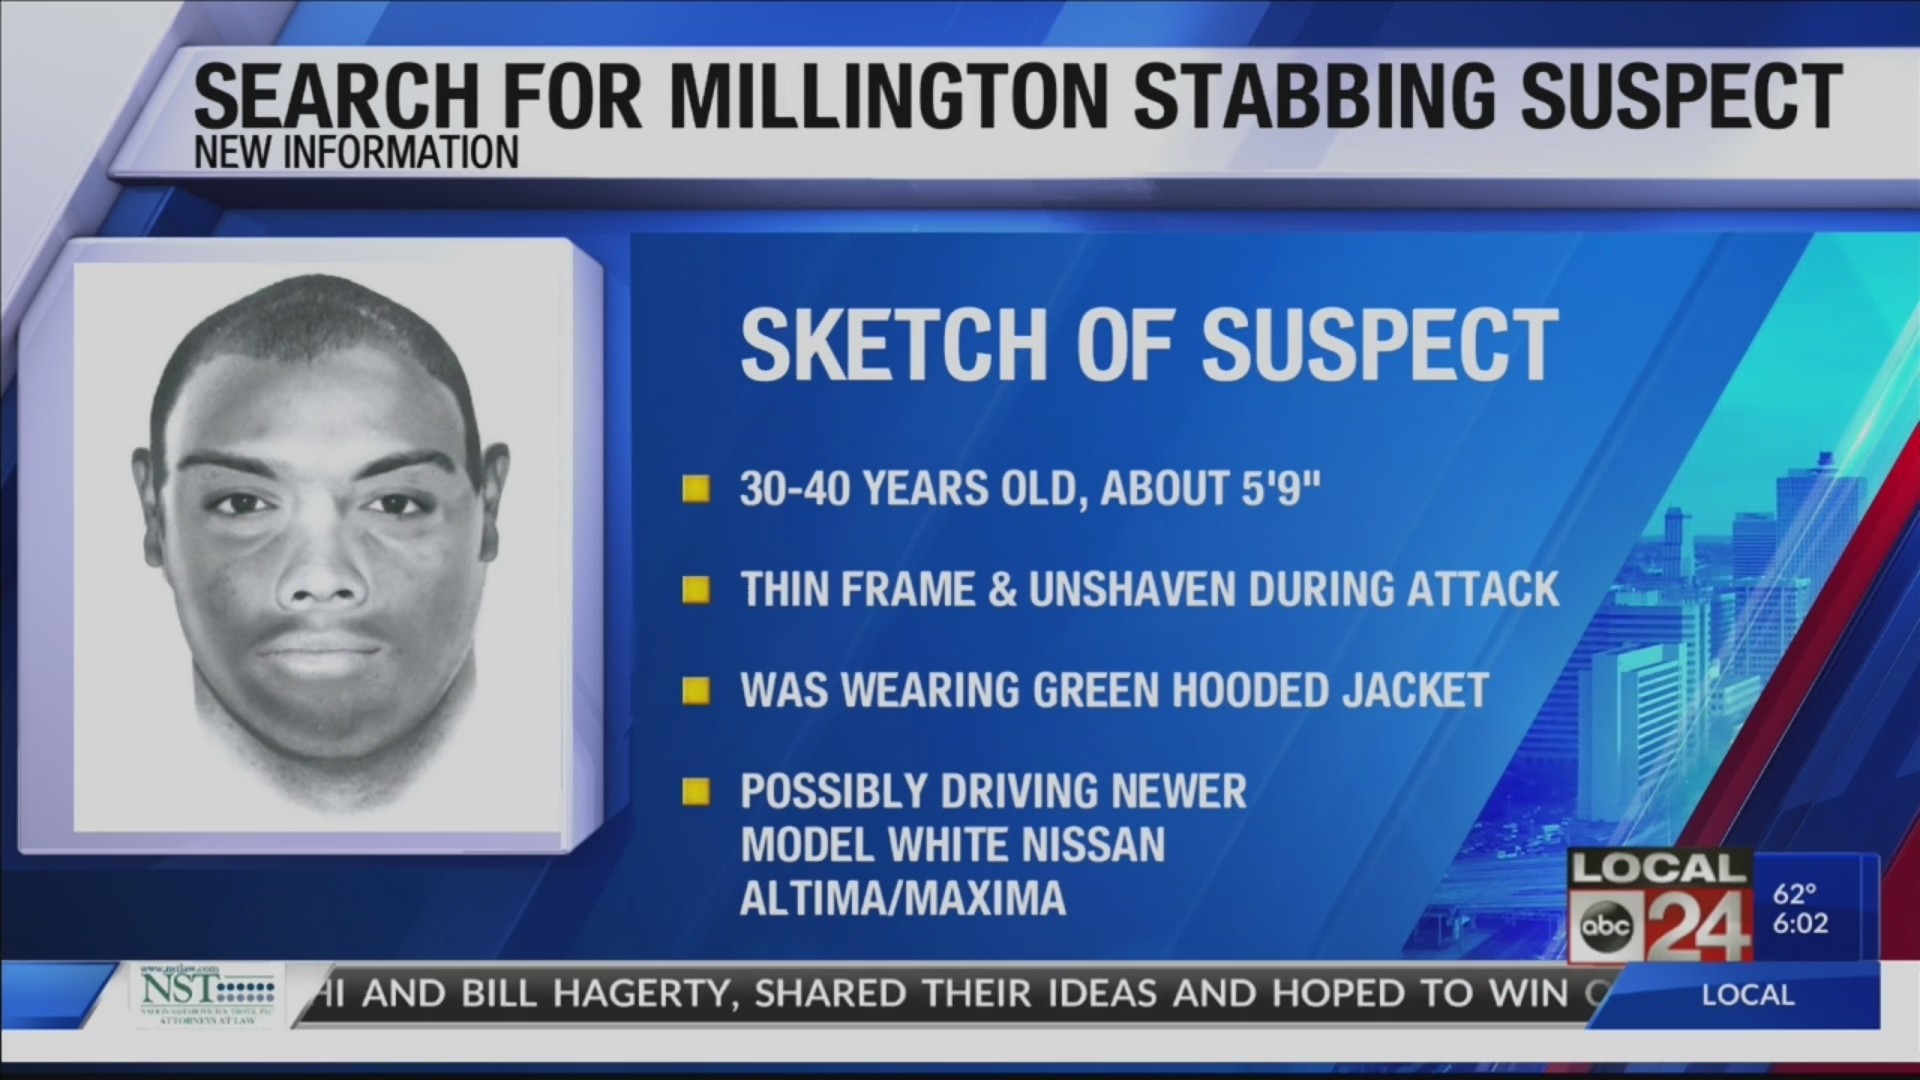 Millington Police release sketch of suspect who stabbed woman outside mental health facility earlier this month